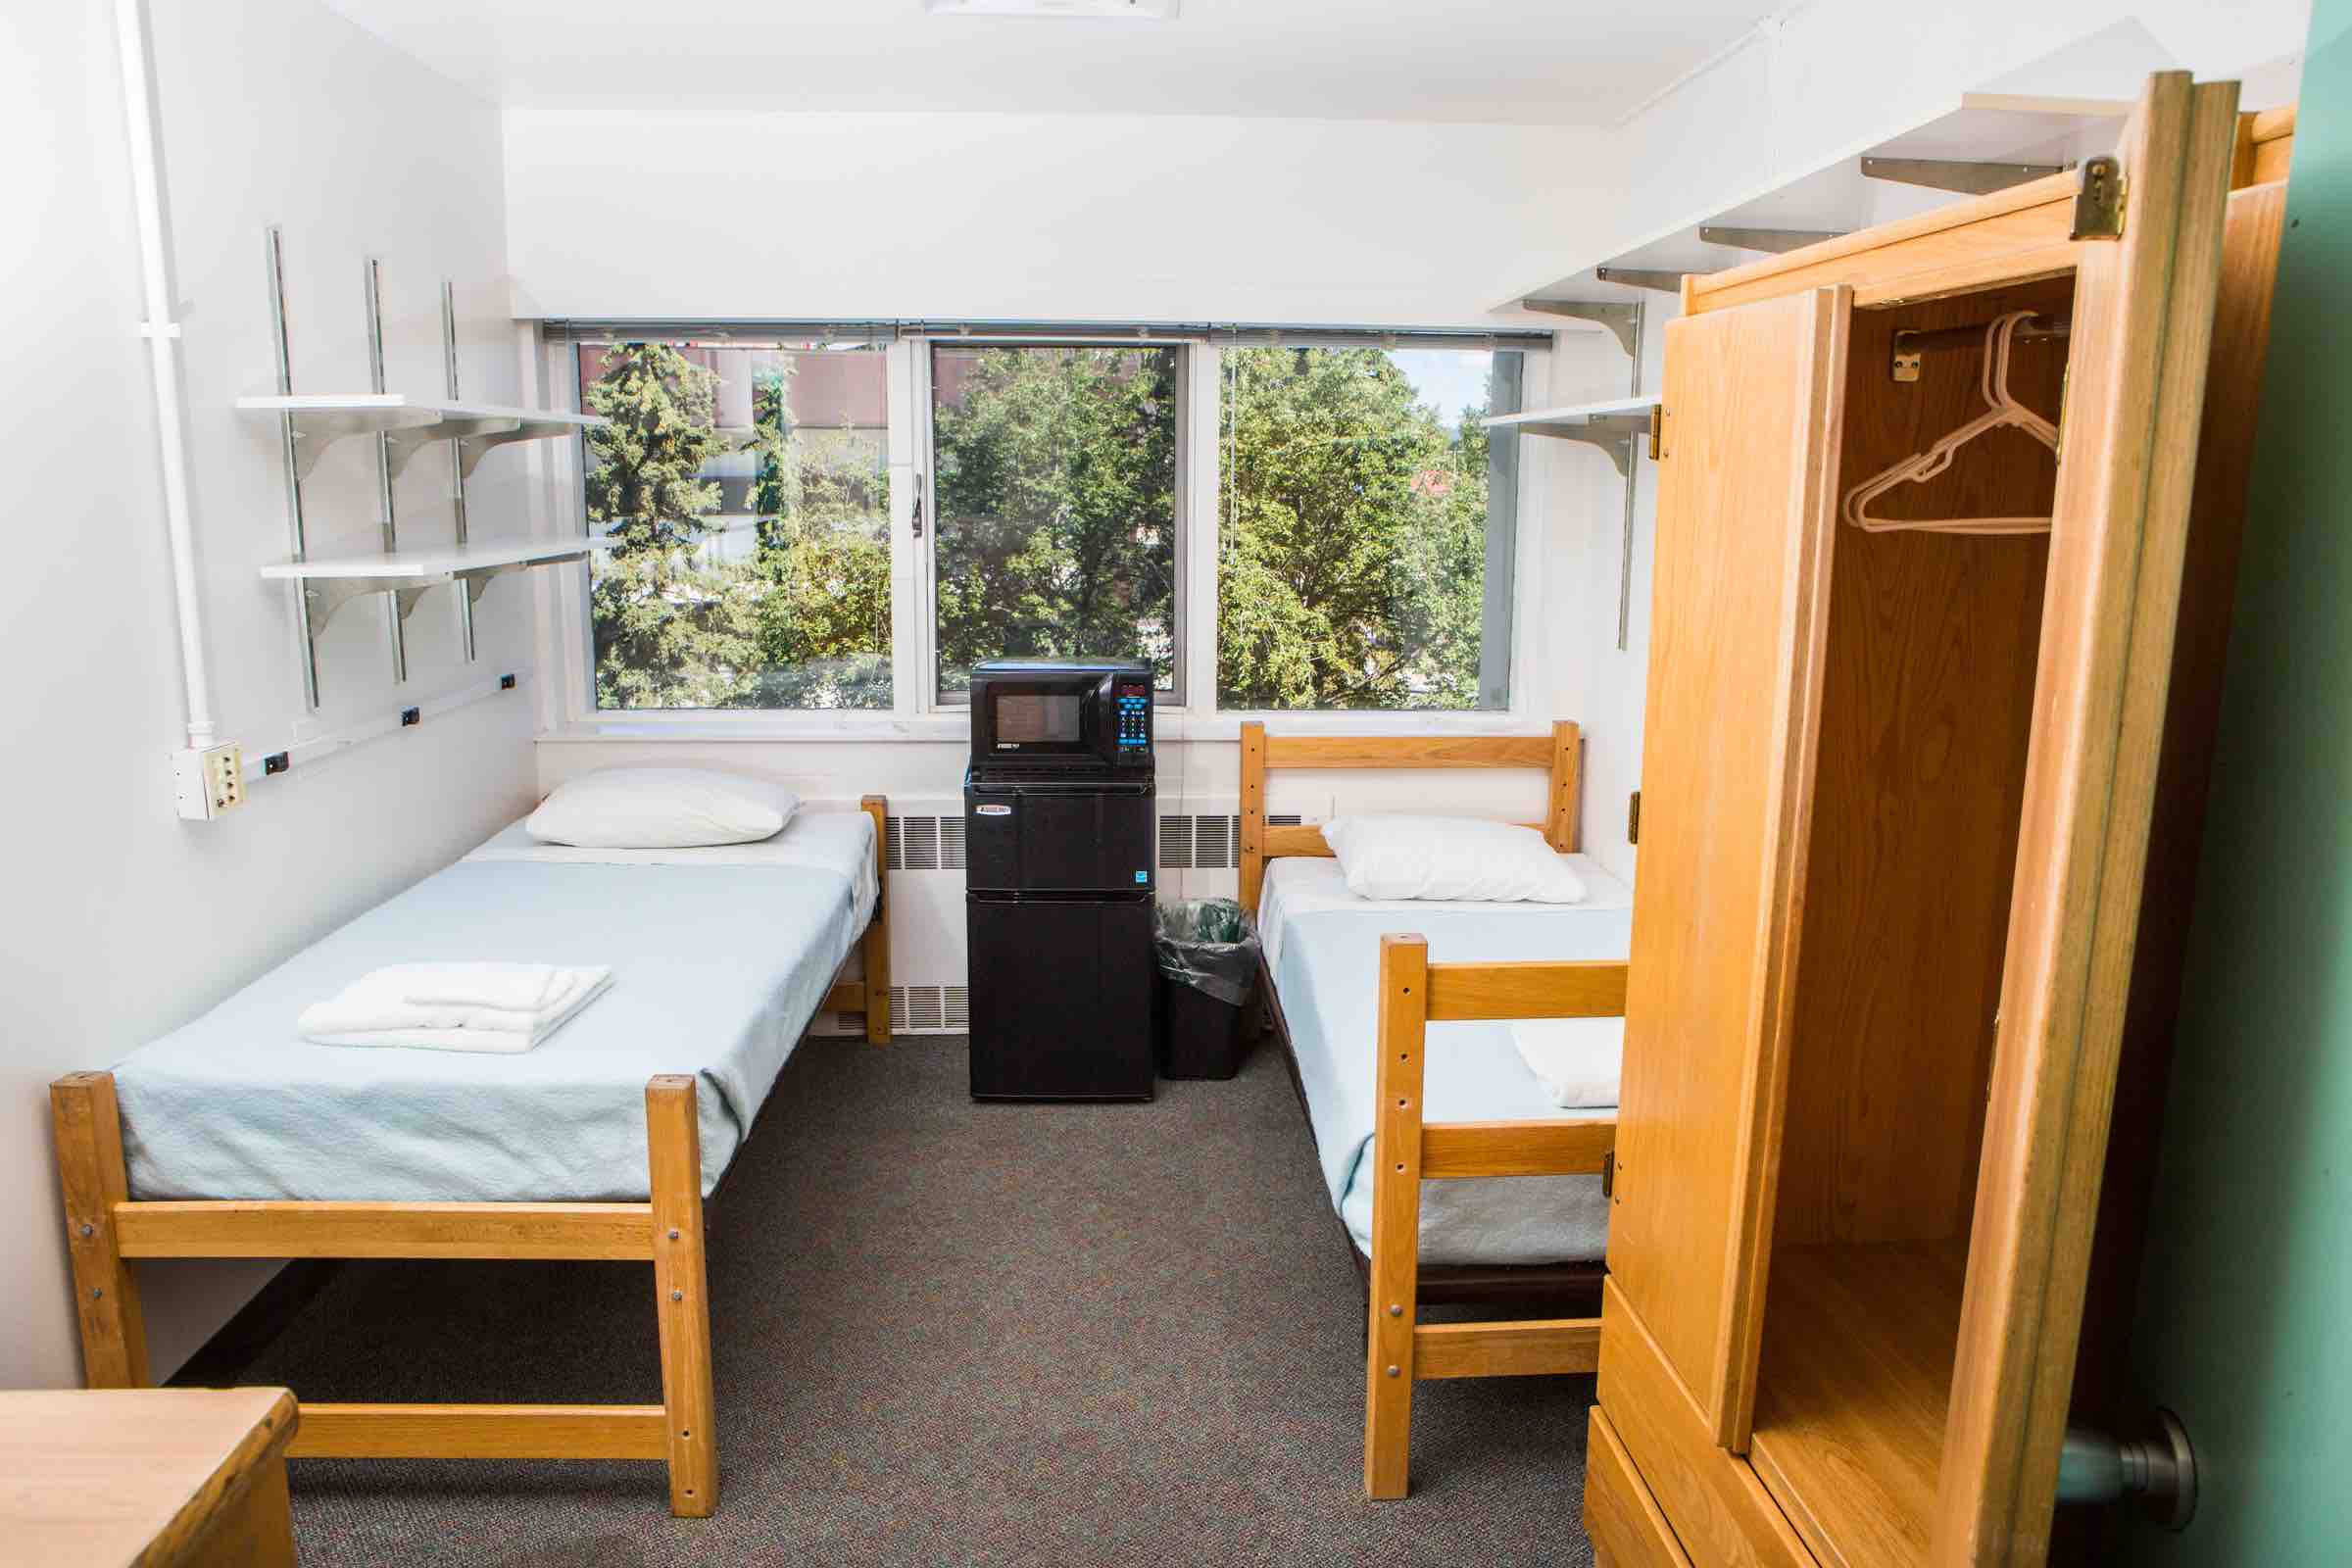 Guest housing | Department of Residence Life